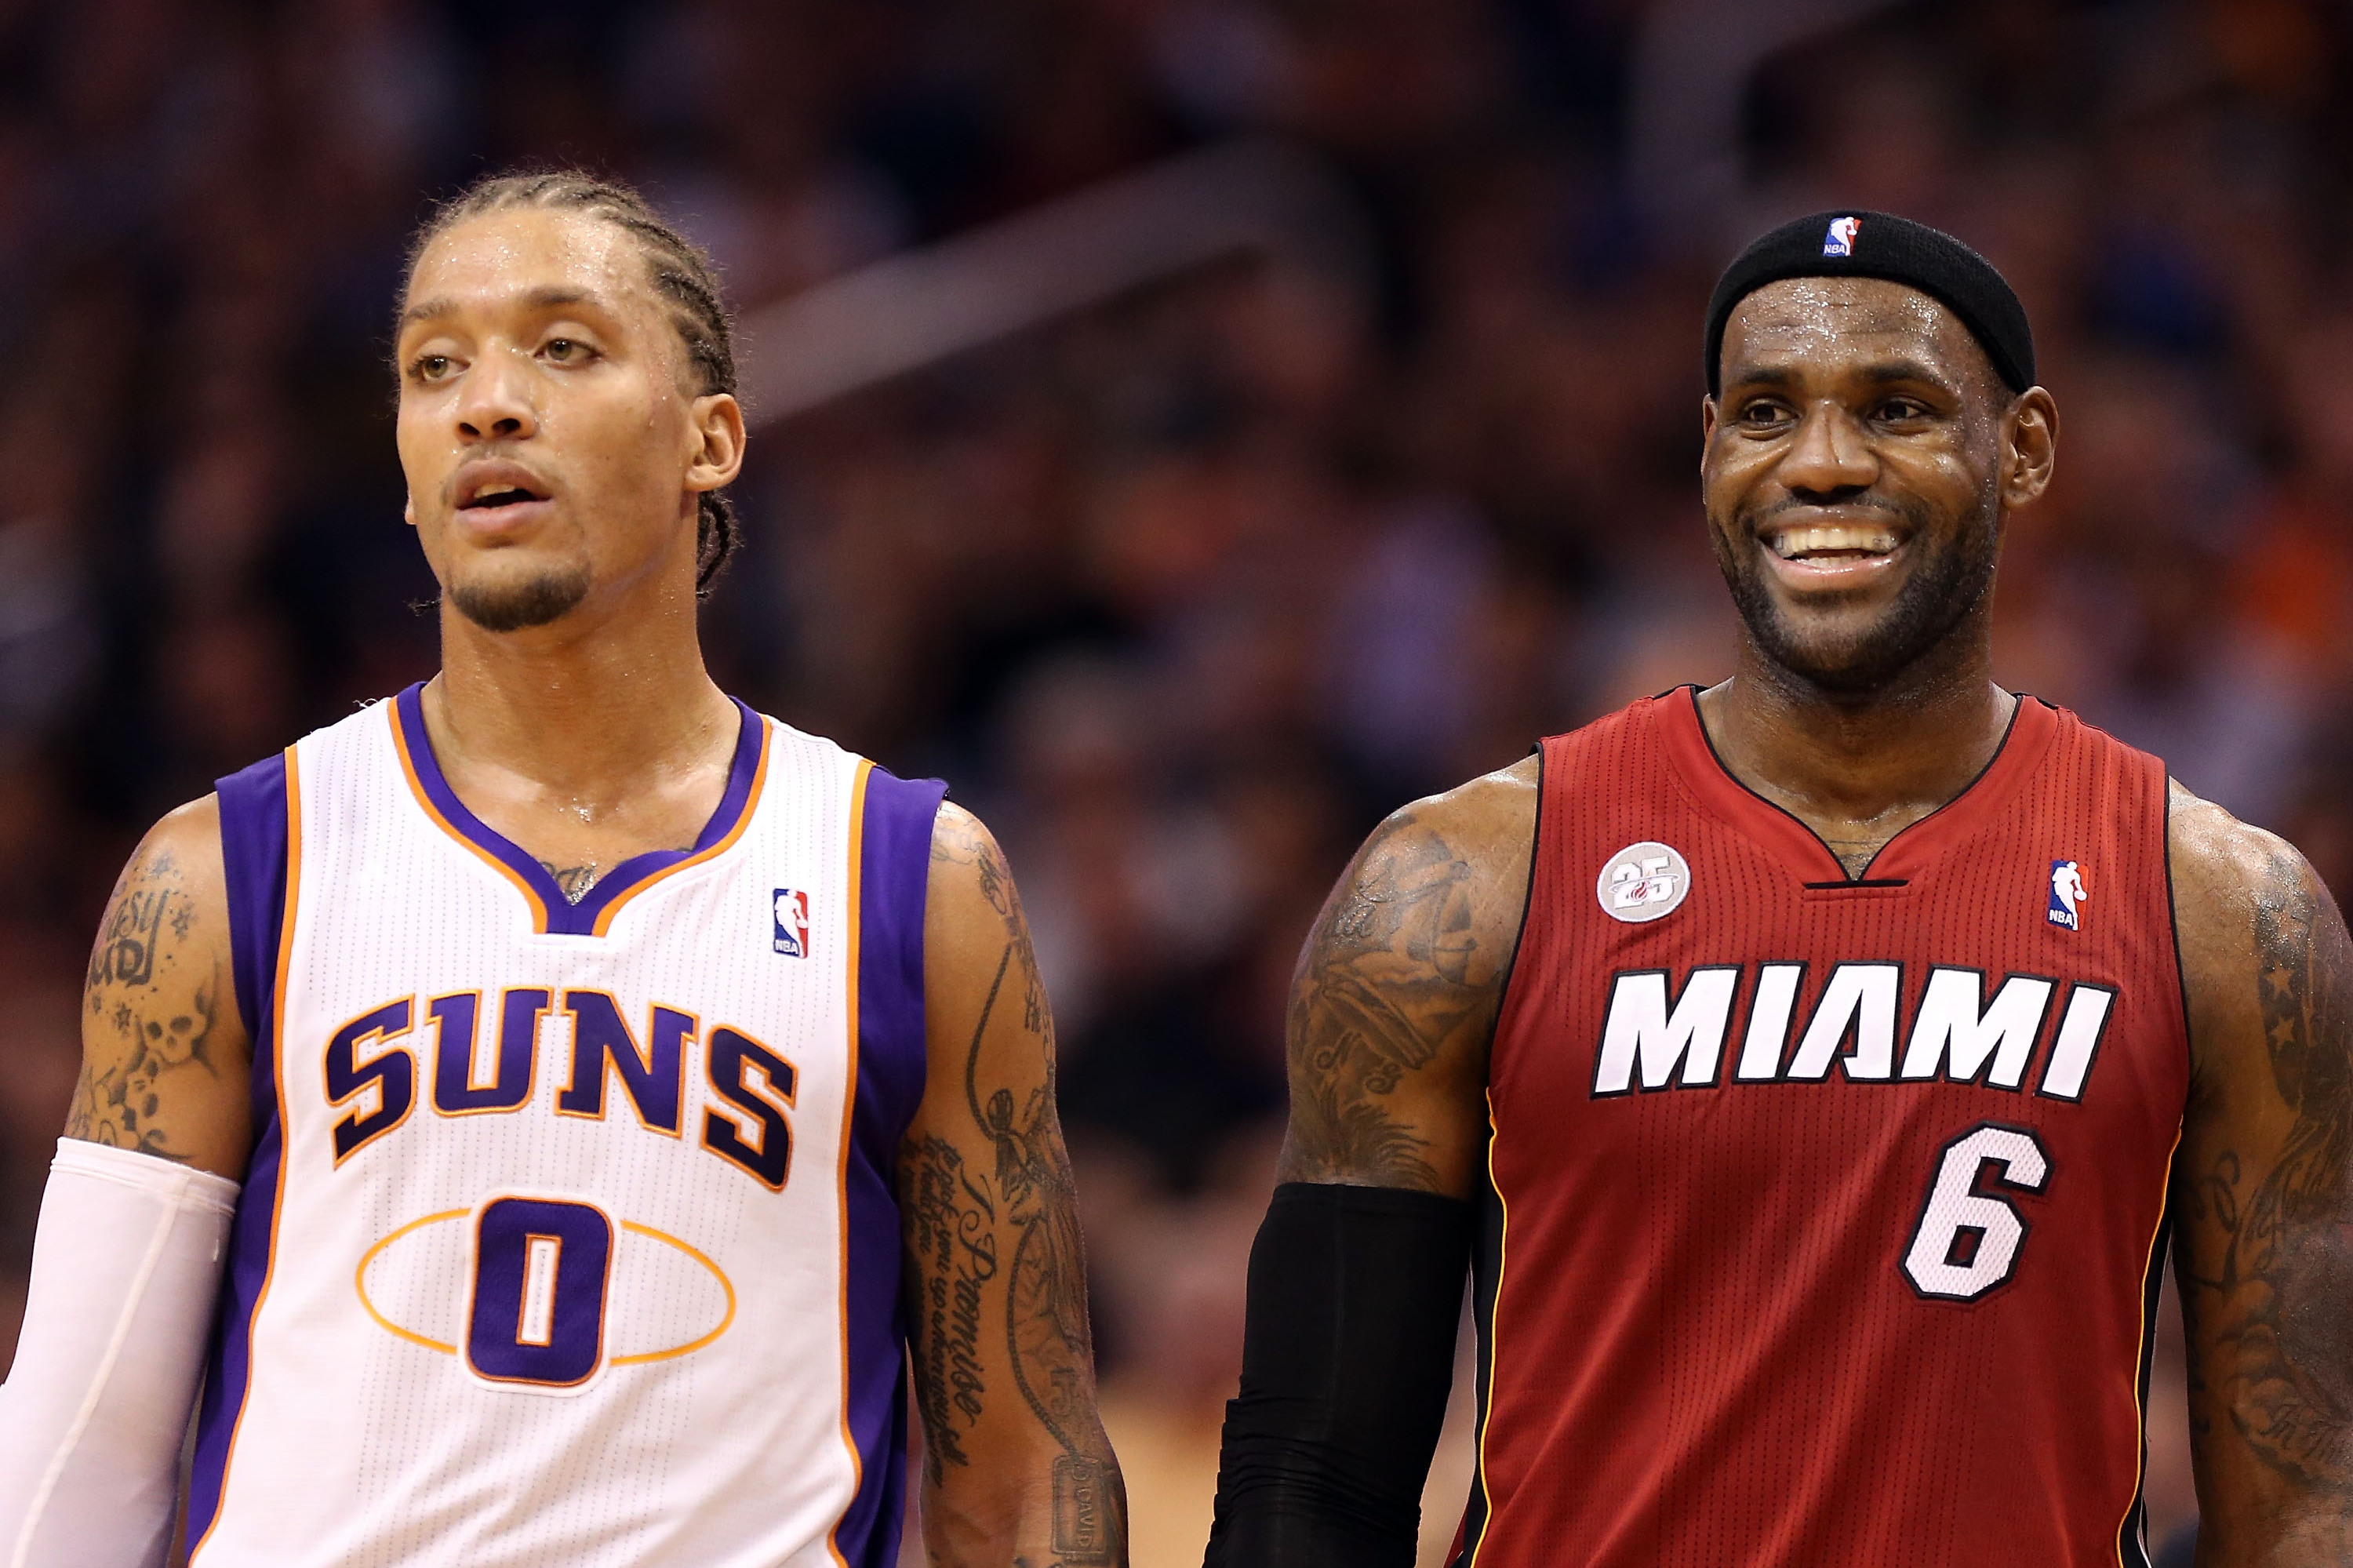 Michael Beasley signs 10-day contract to return to Heat 